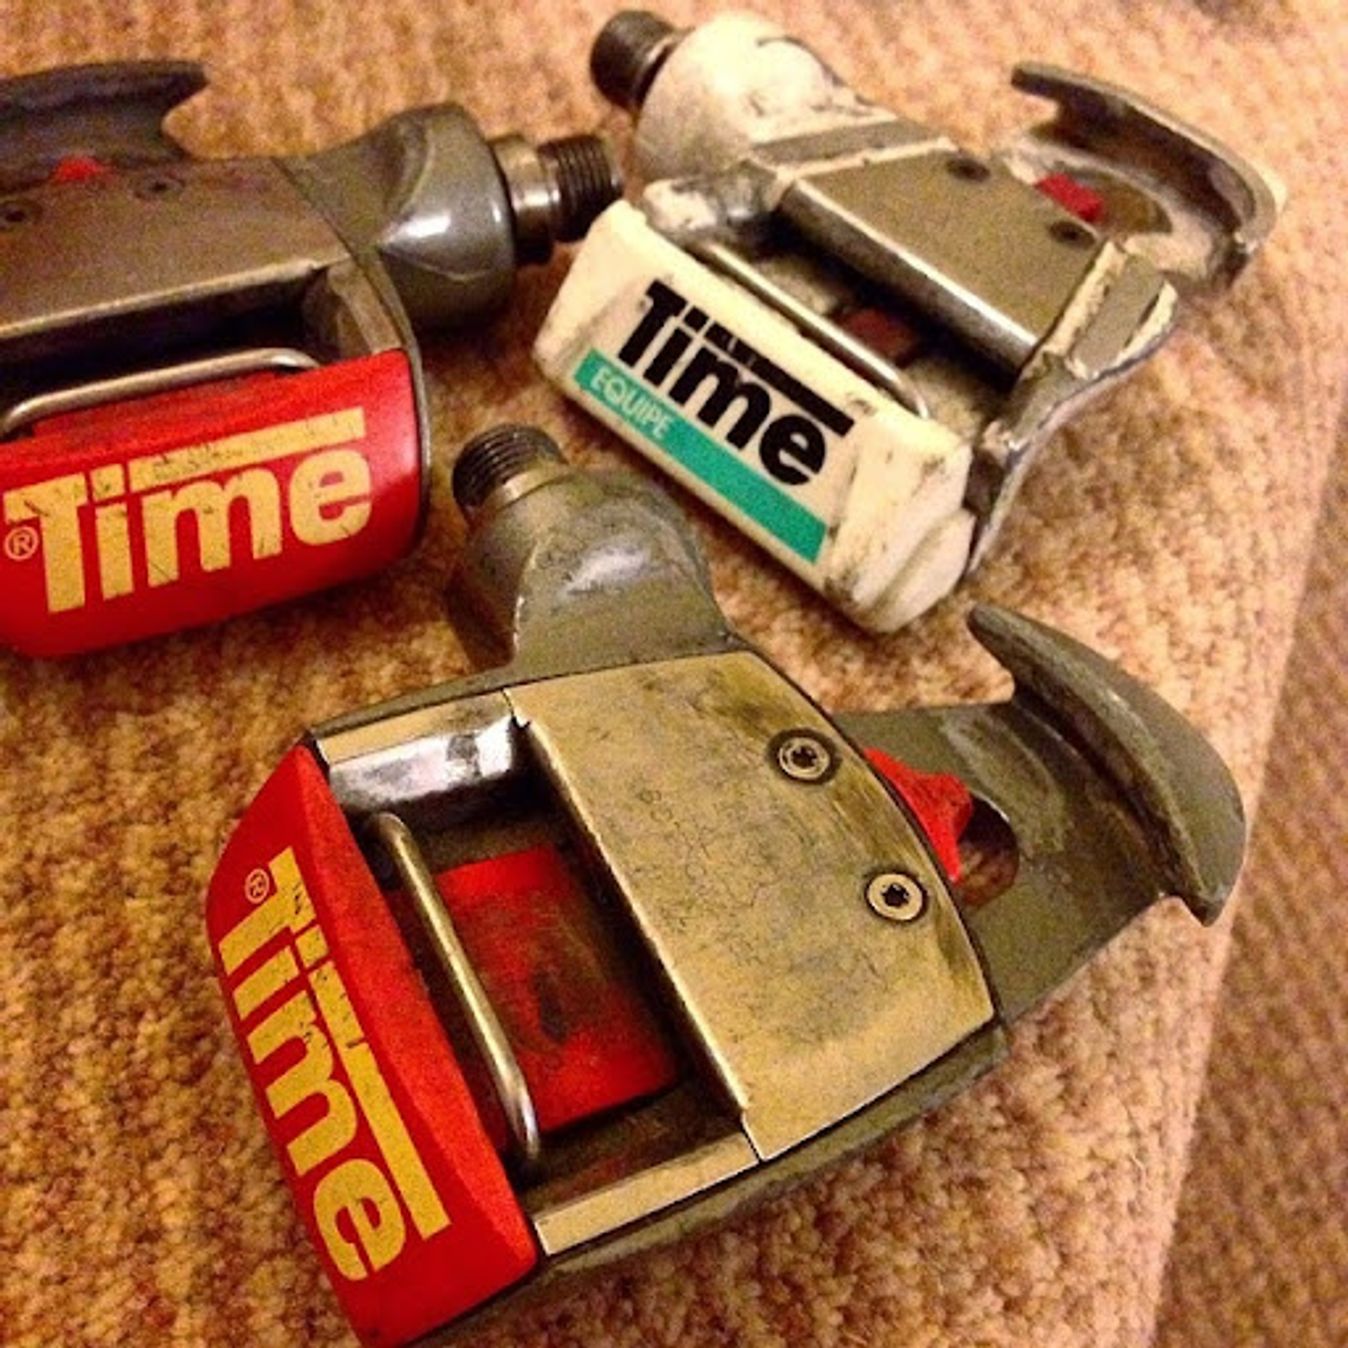 Some of the classic Time TBT pedals from the early/mid 90s